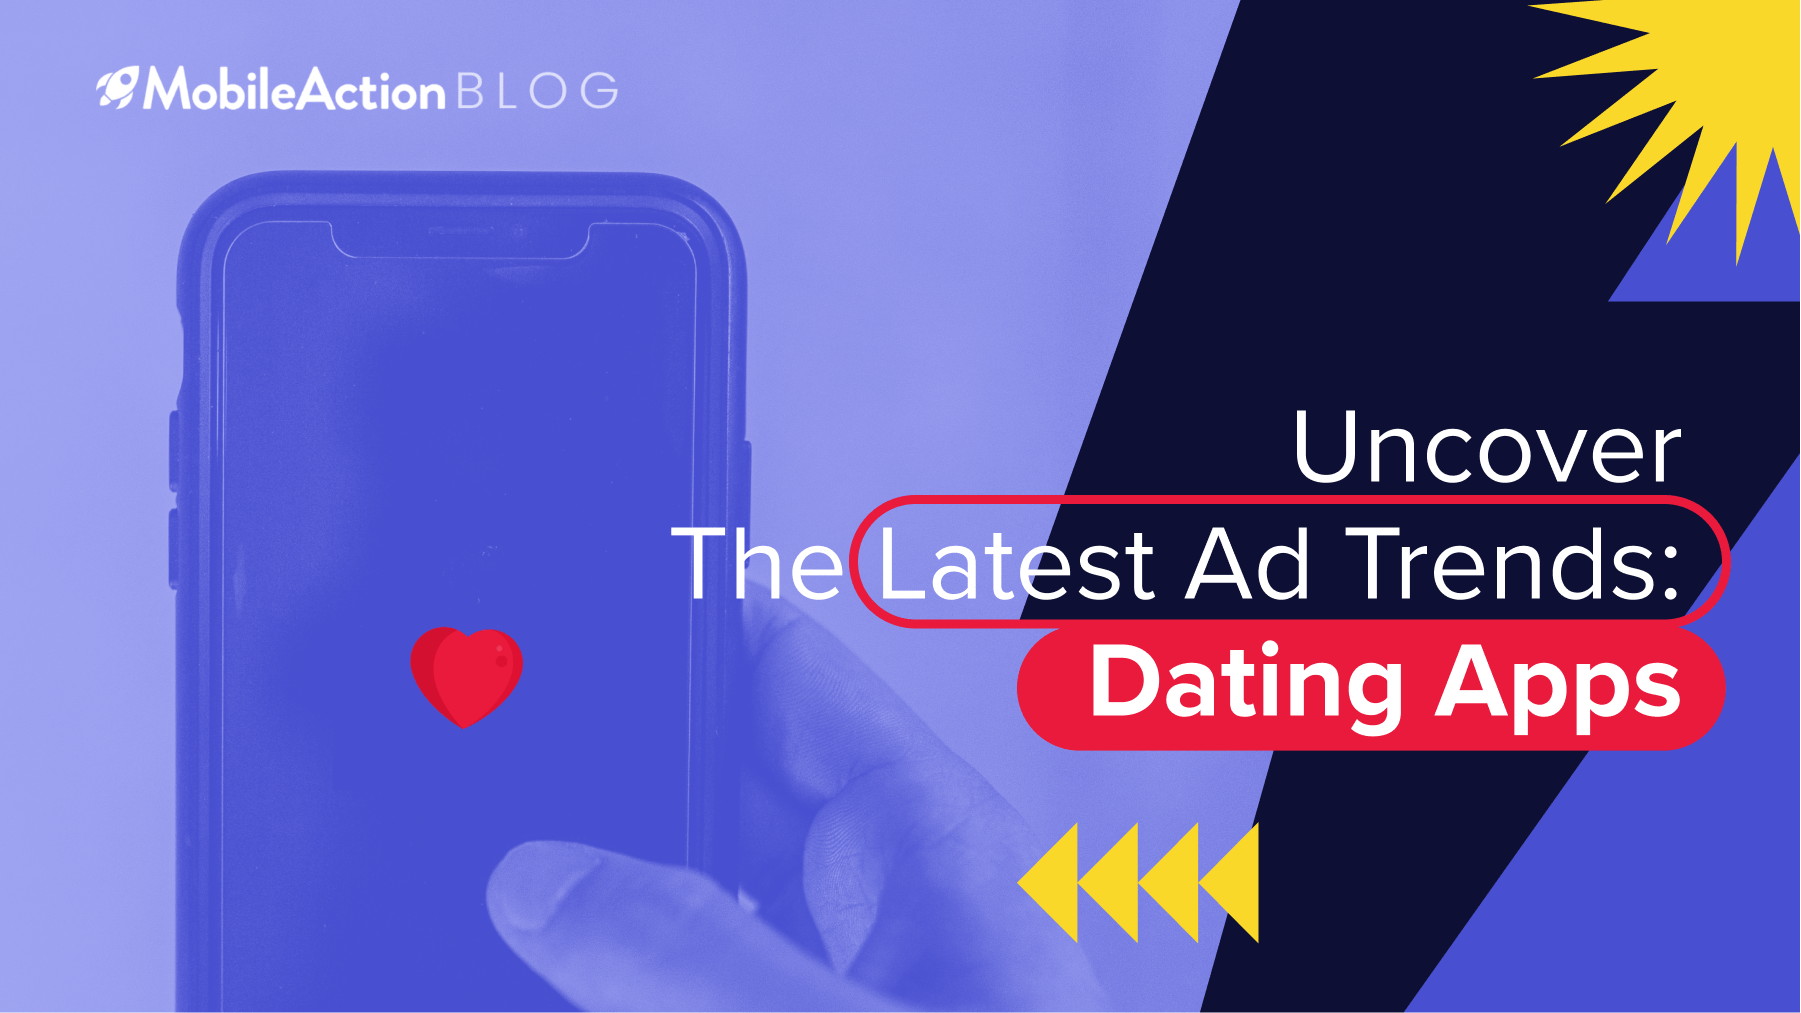 Uncover The Latest Ad Trends: Dating Apps